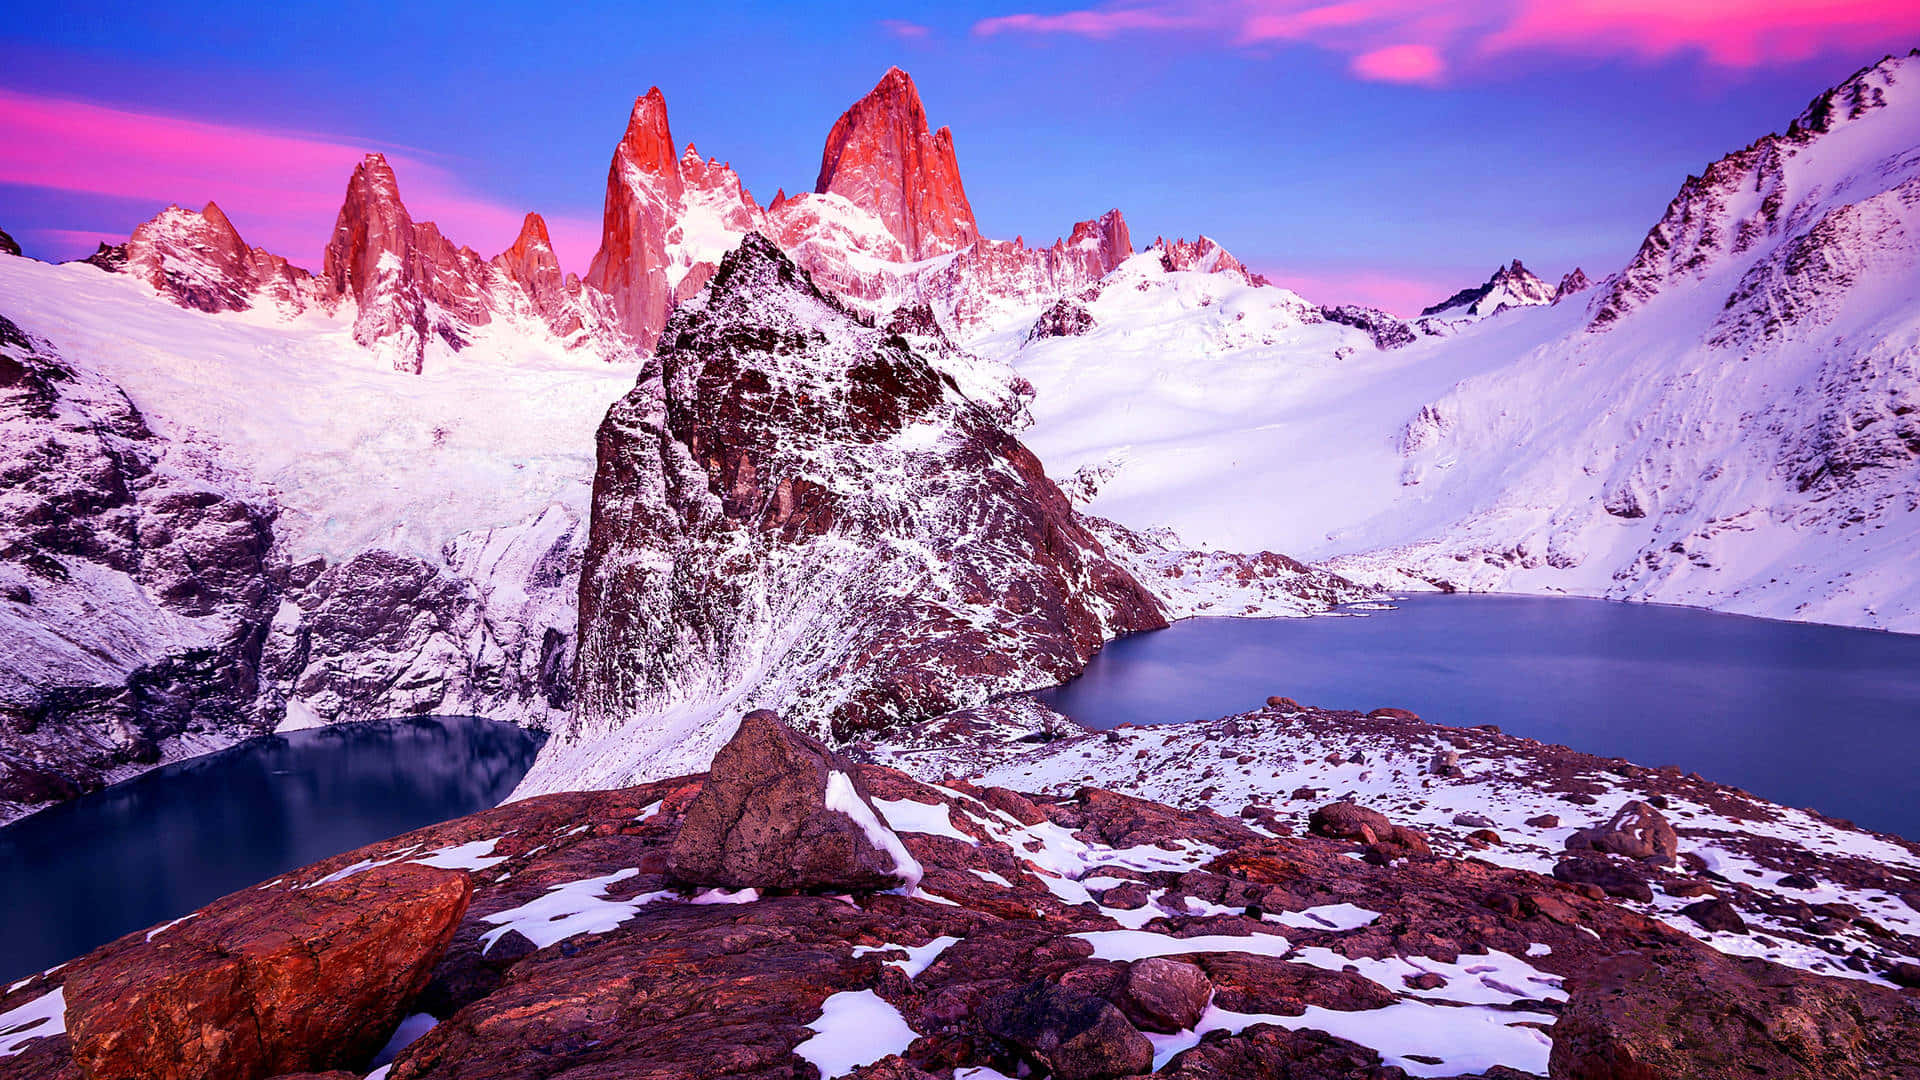 Explore the remote and awe-inspiring beauty of Patagonia.